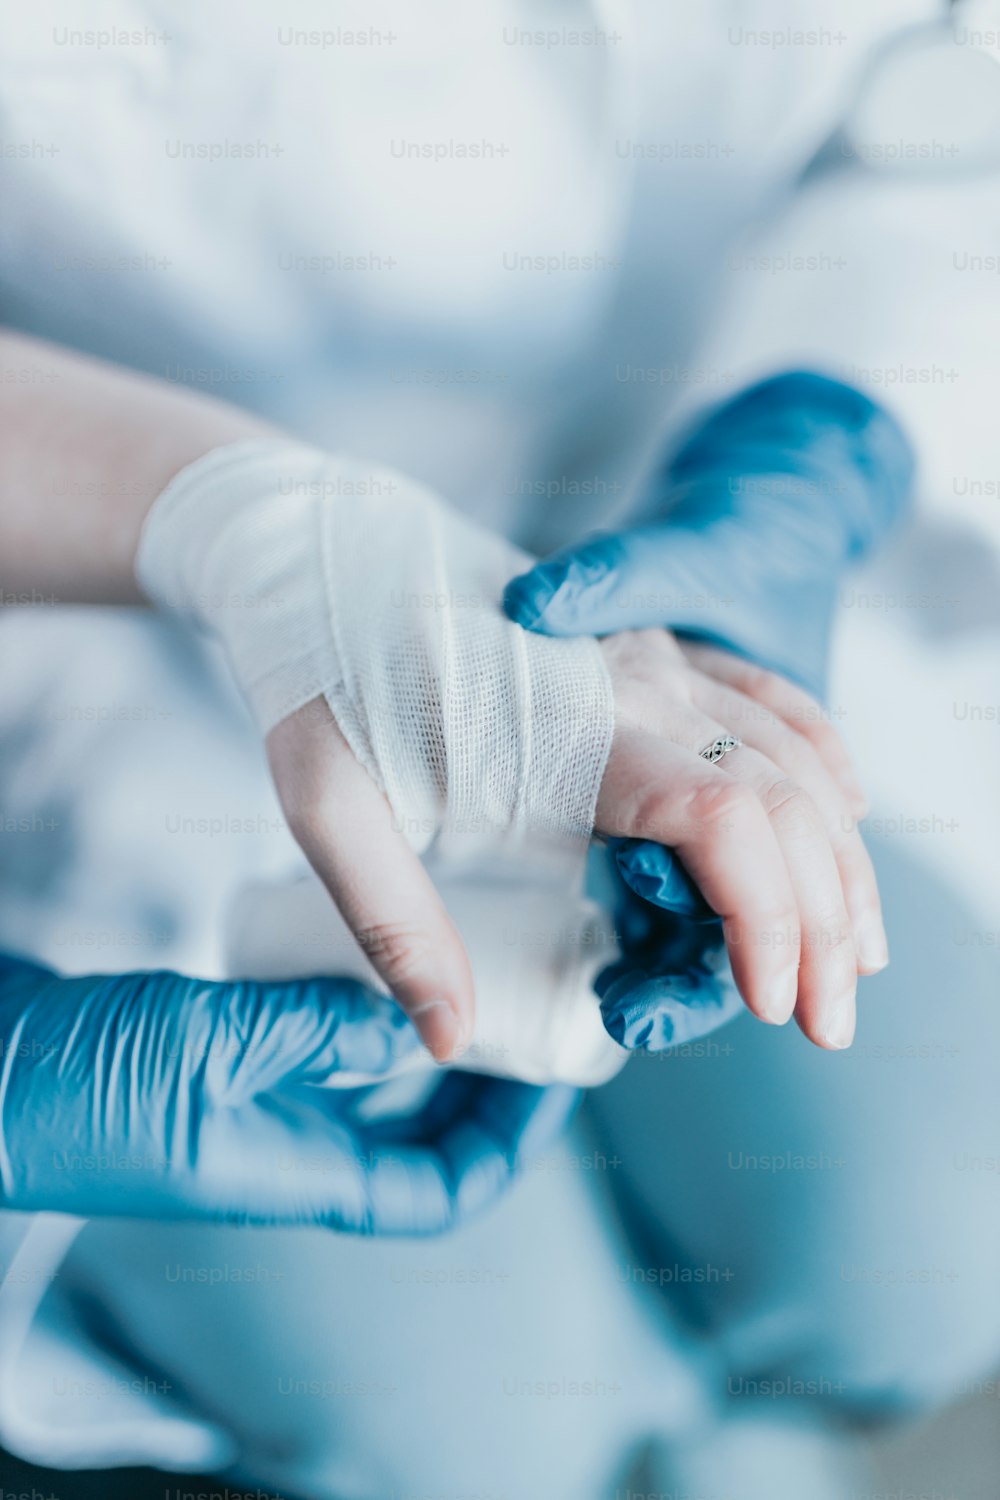 a person in a white shirt and blue gloves